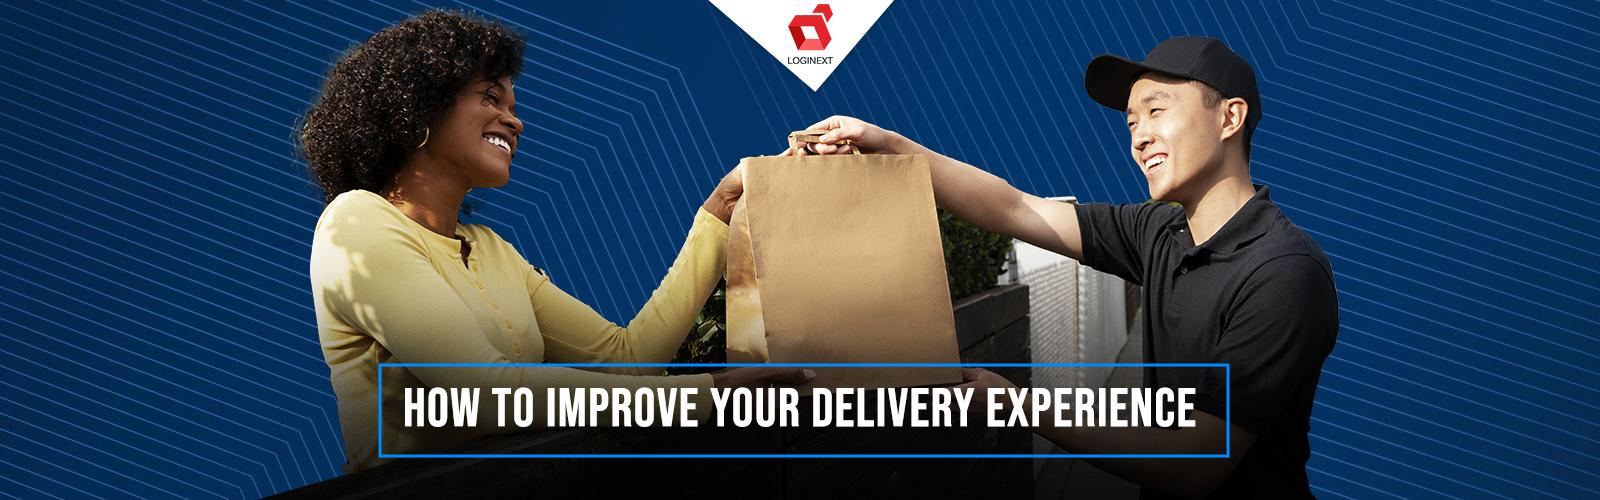 How to improve delivery experience using delivery management software